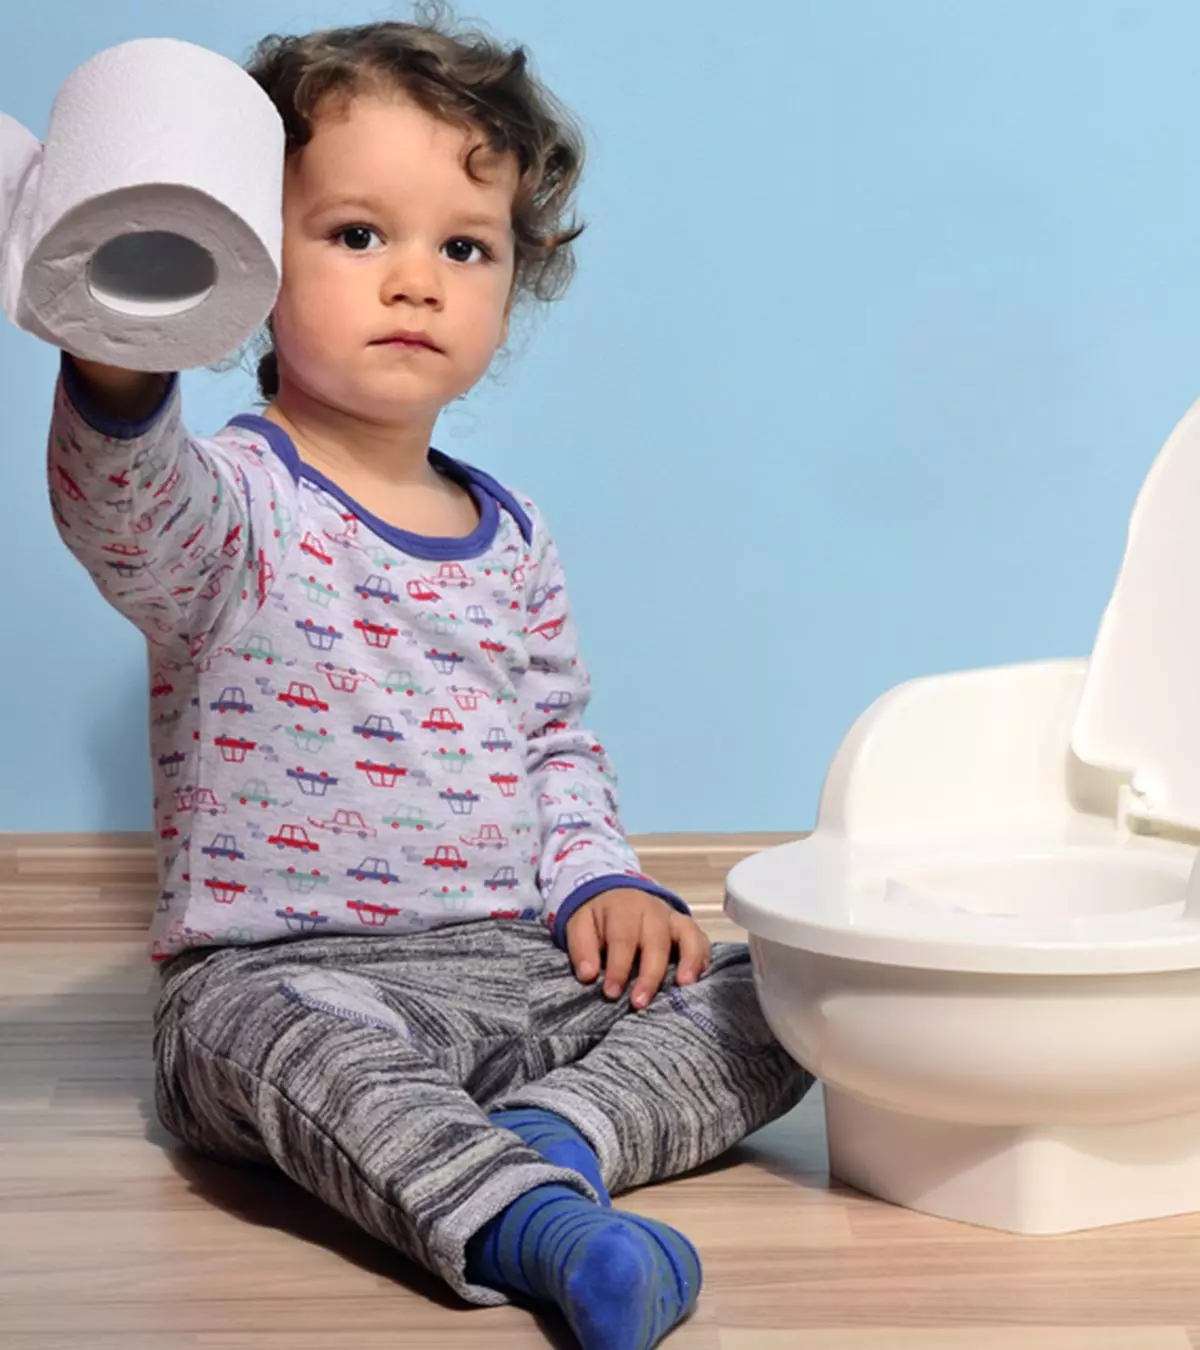 5 Things No One Tells You About Potty Training